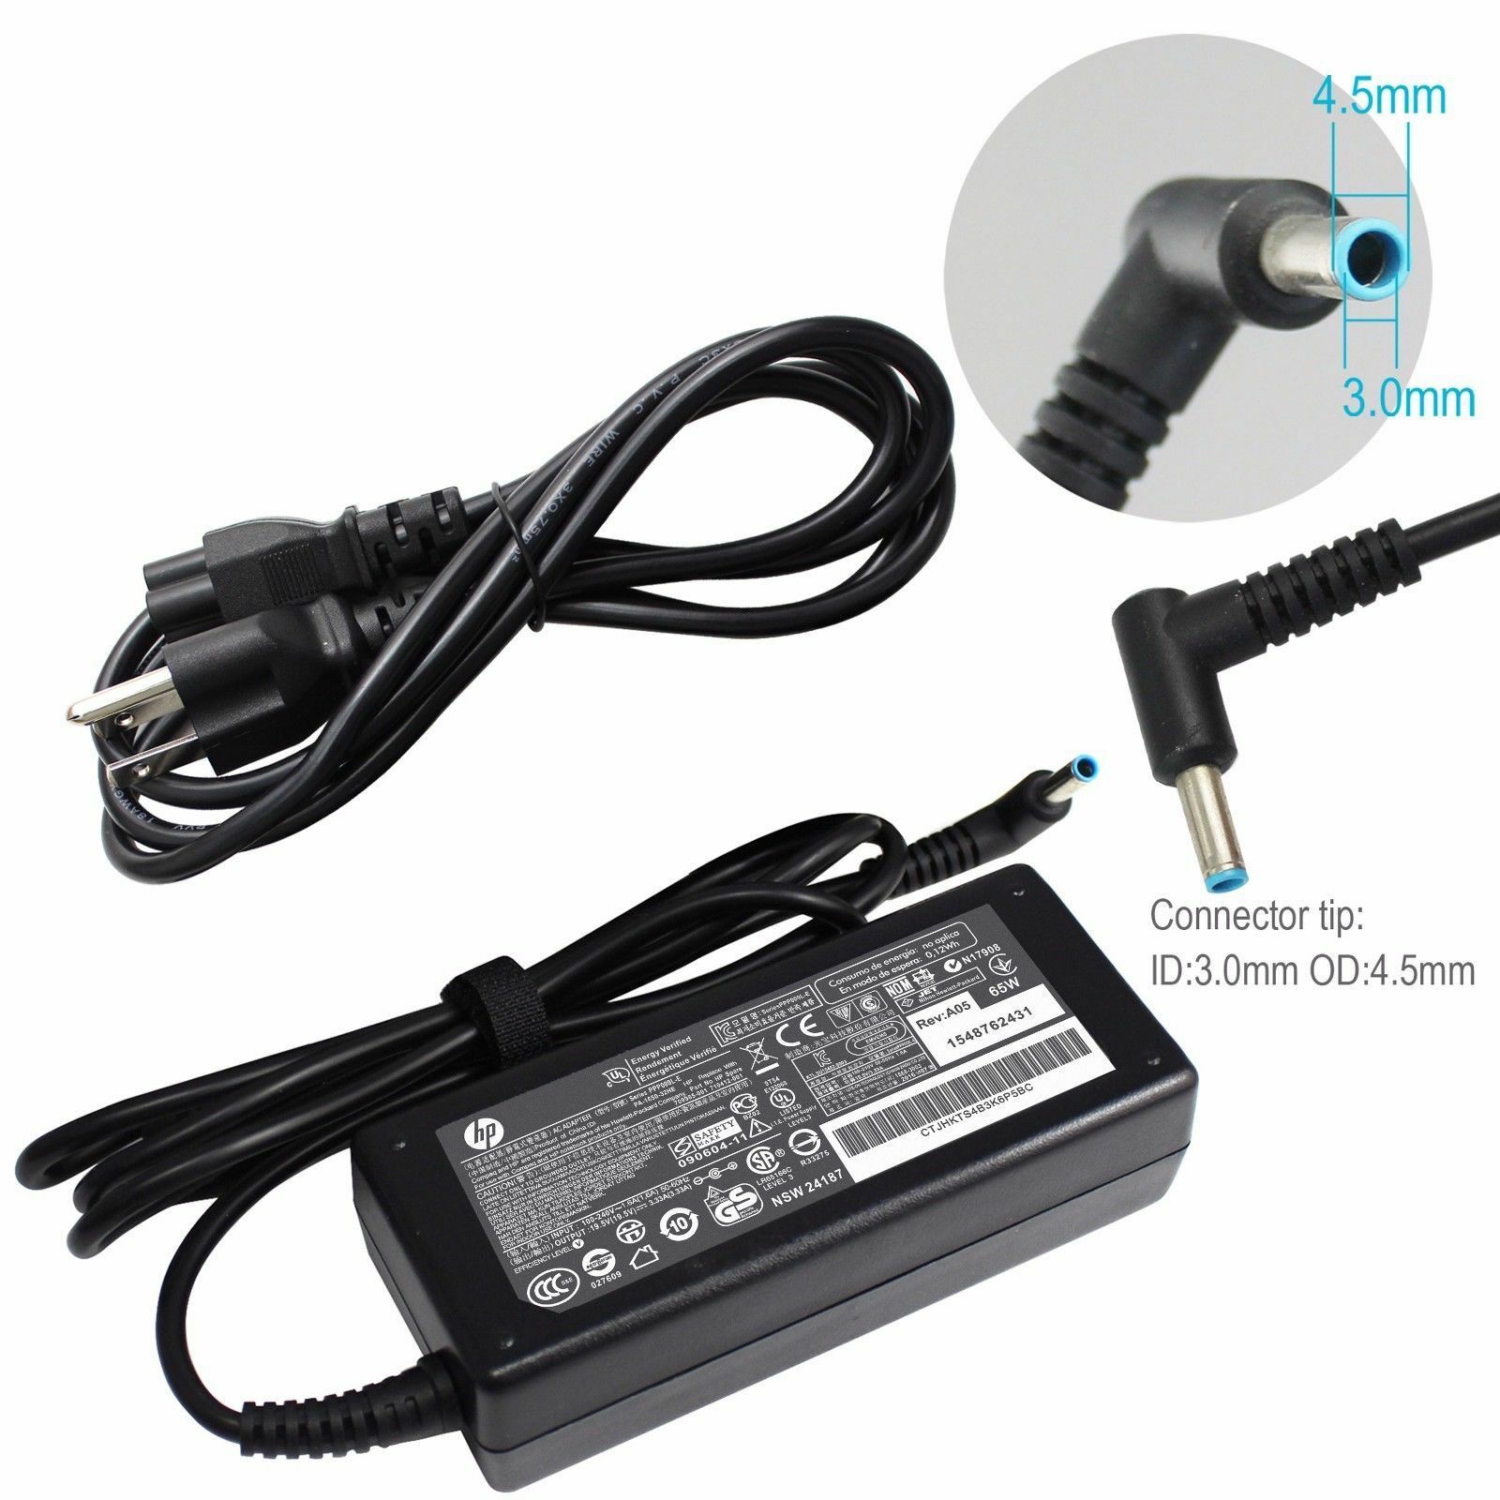 Refurbished (Good) Genuine HP AC Adapter Charger 19.5V 3.33A 45W 4.5*3.0mm Blue Tip